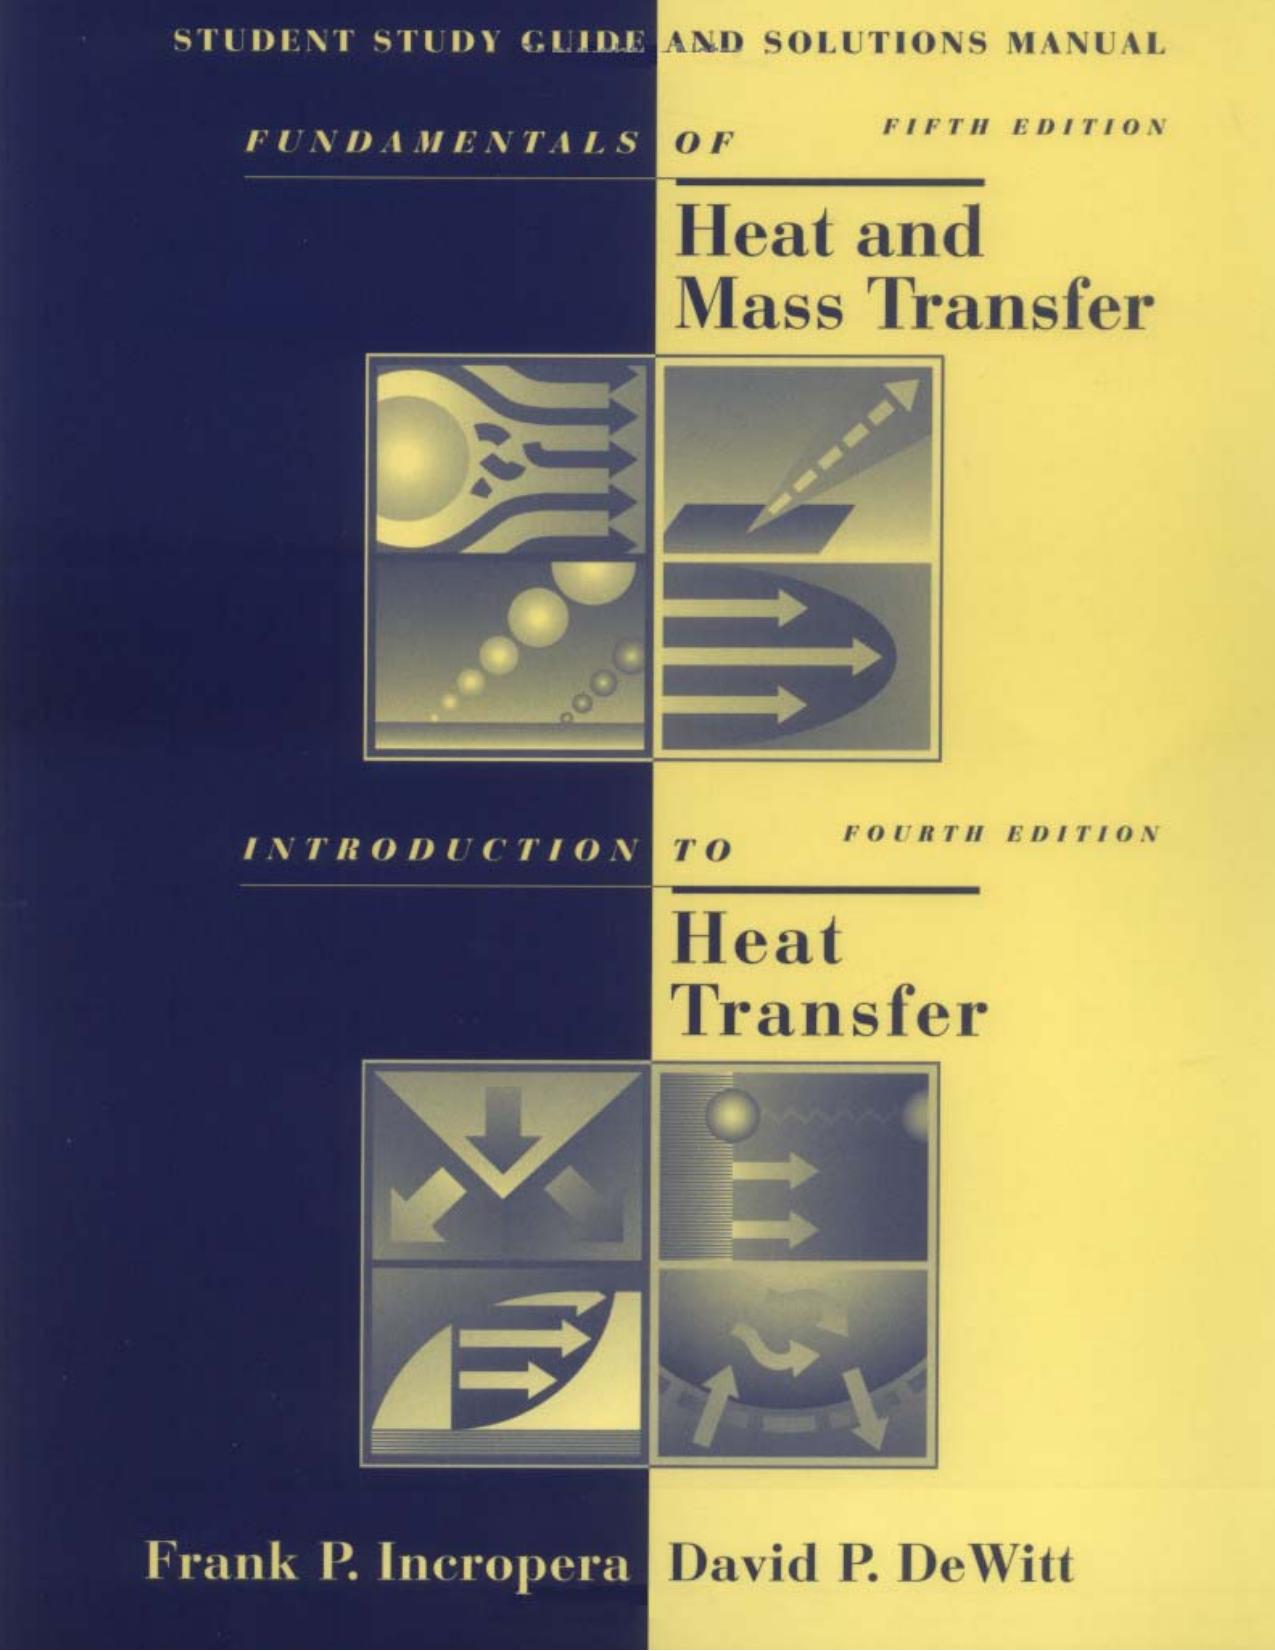 Fundamentals of Heat and Mass Transfer - Solutions Manual